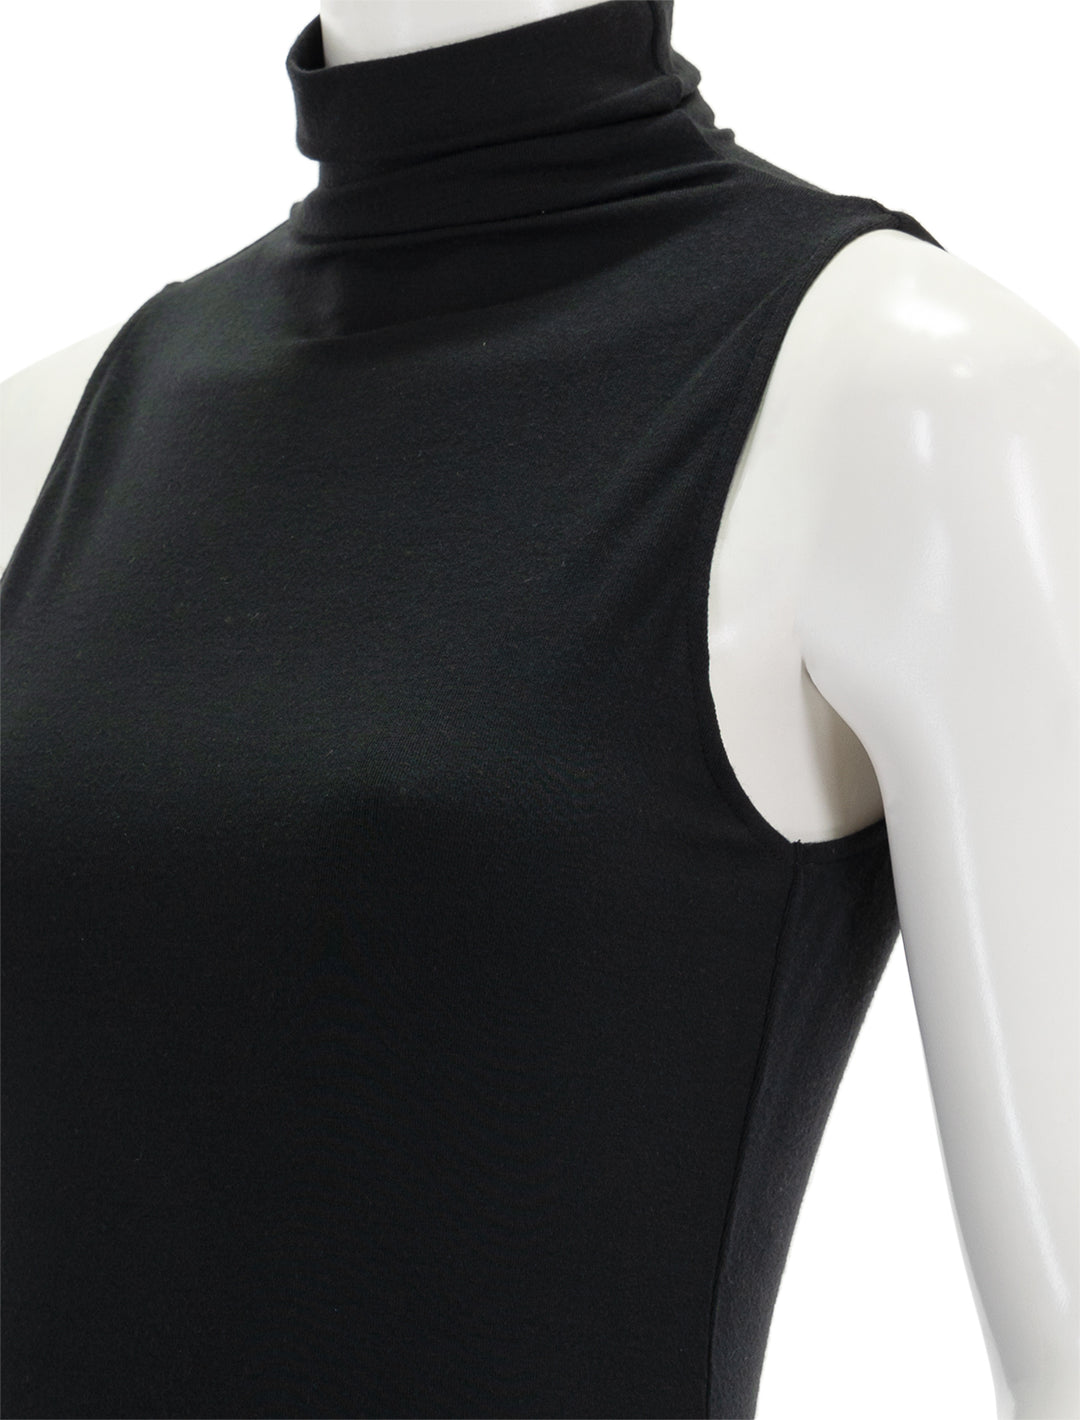 Close-up view of Vince's black sleeveless turtleneck.